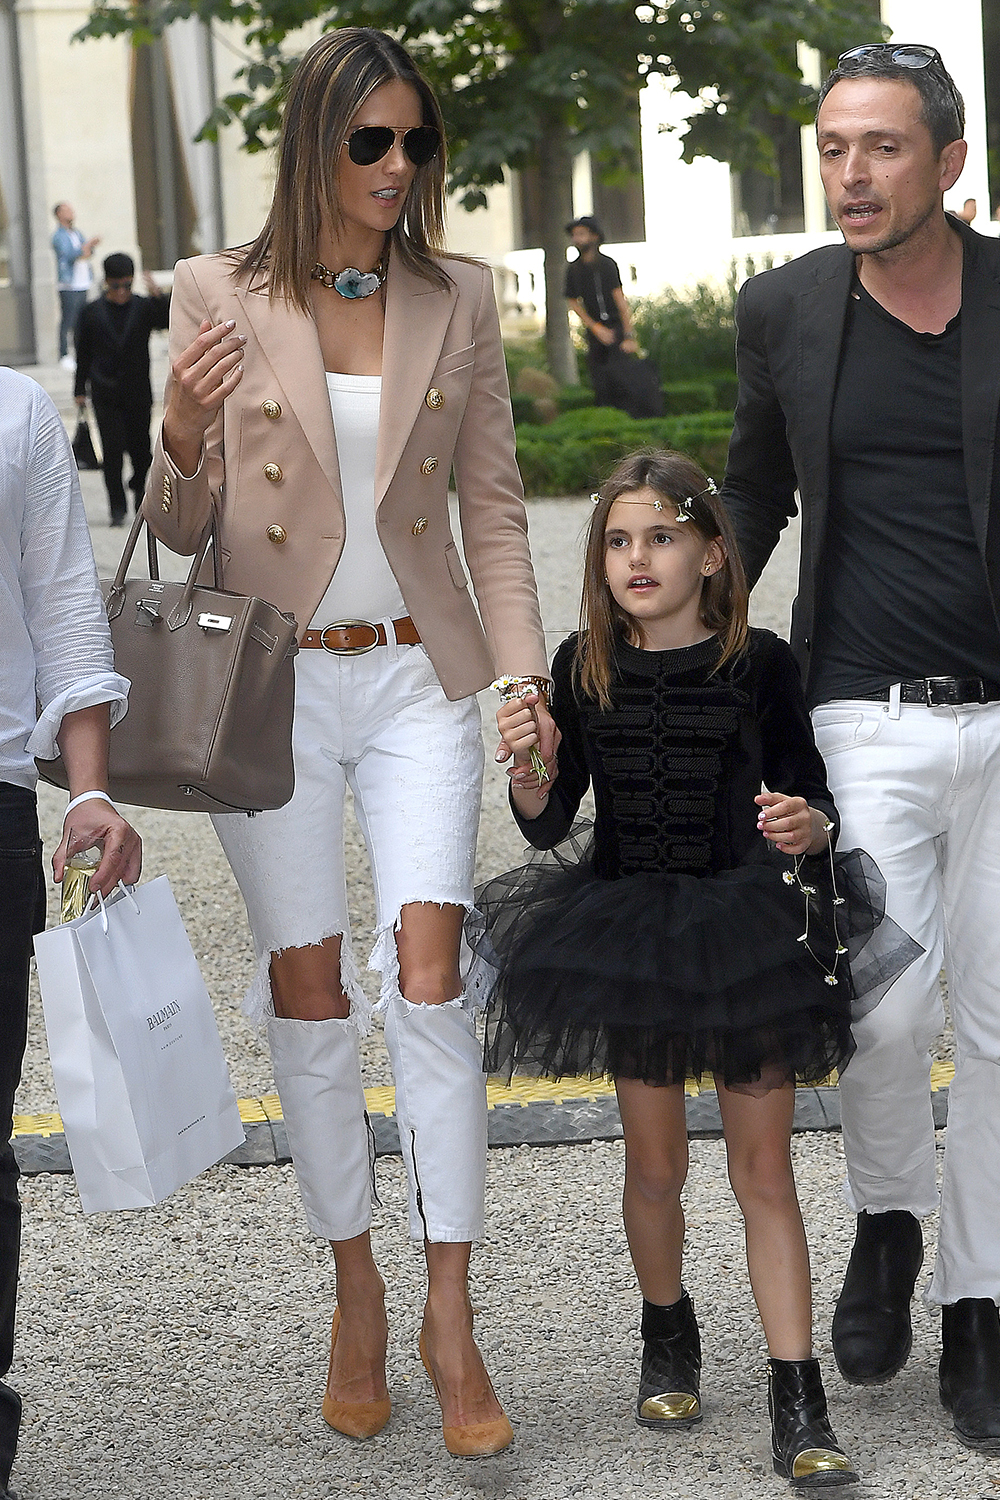 Alessandra Ambrosio and her daughter Anja Mazur leaving the Balmain Show during Mens Paris Fashion Week.